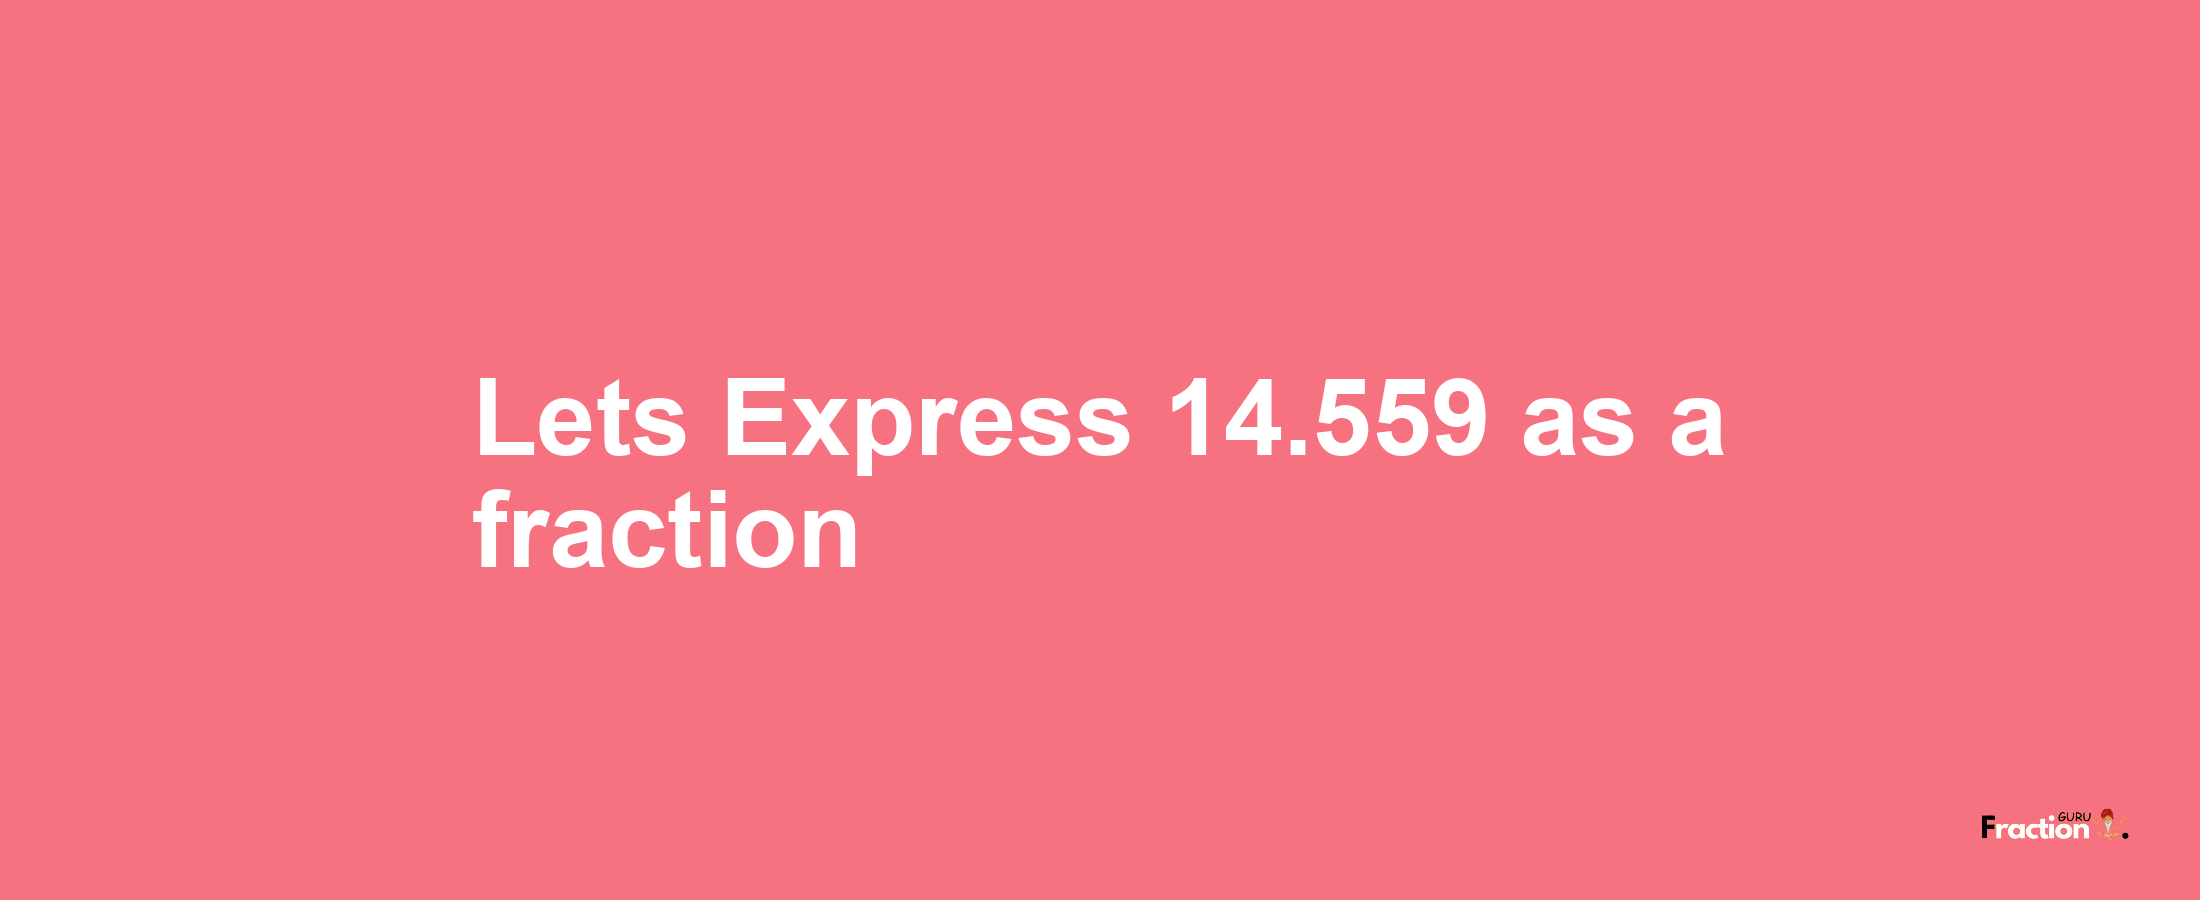 Lets Express 14.559 as afraction